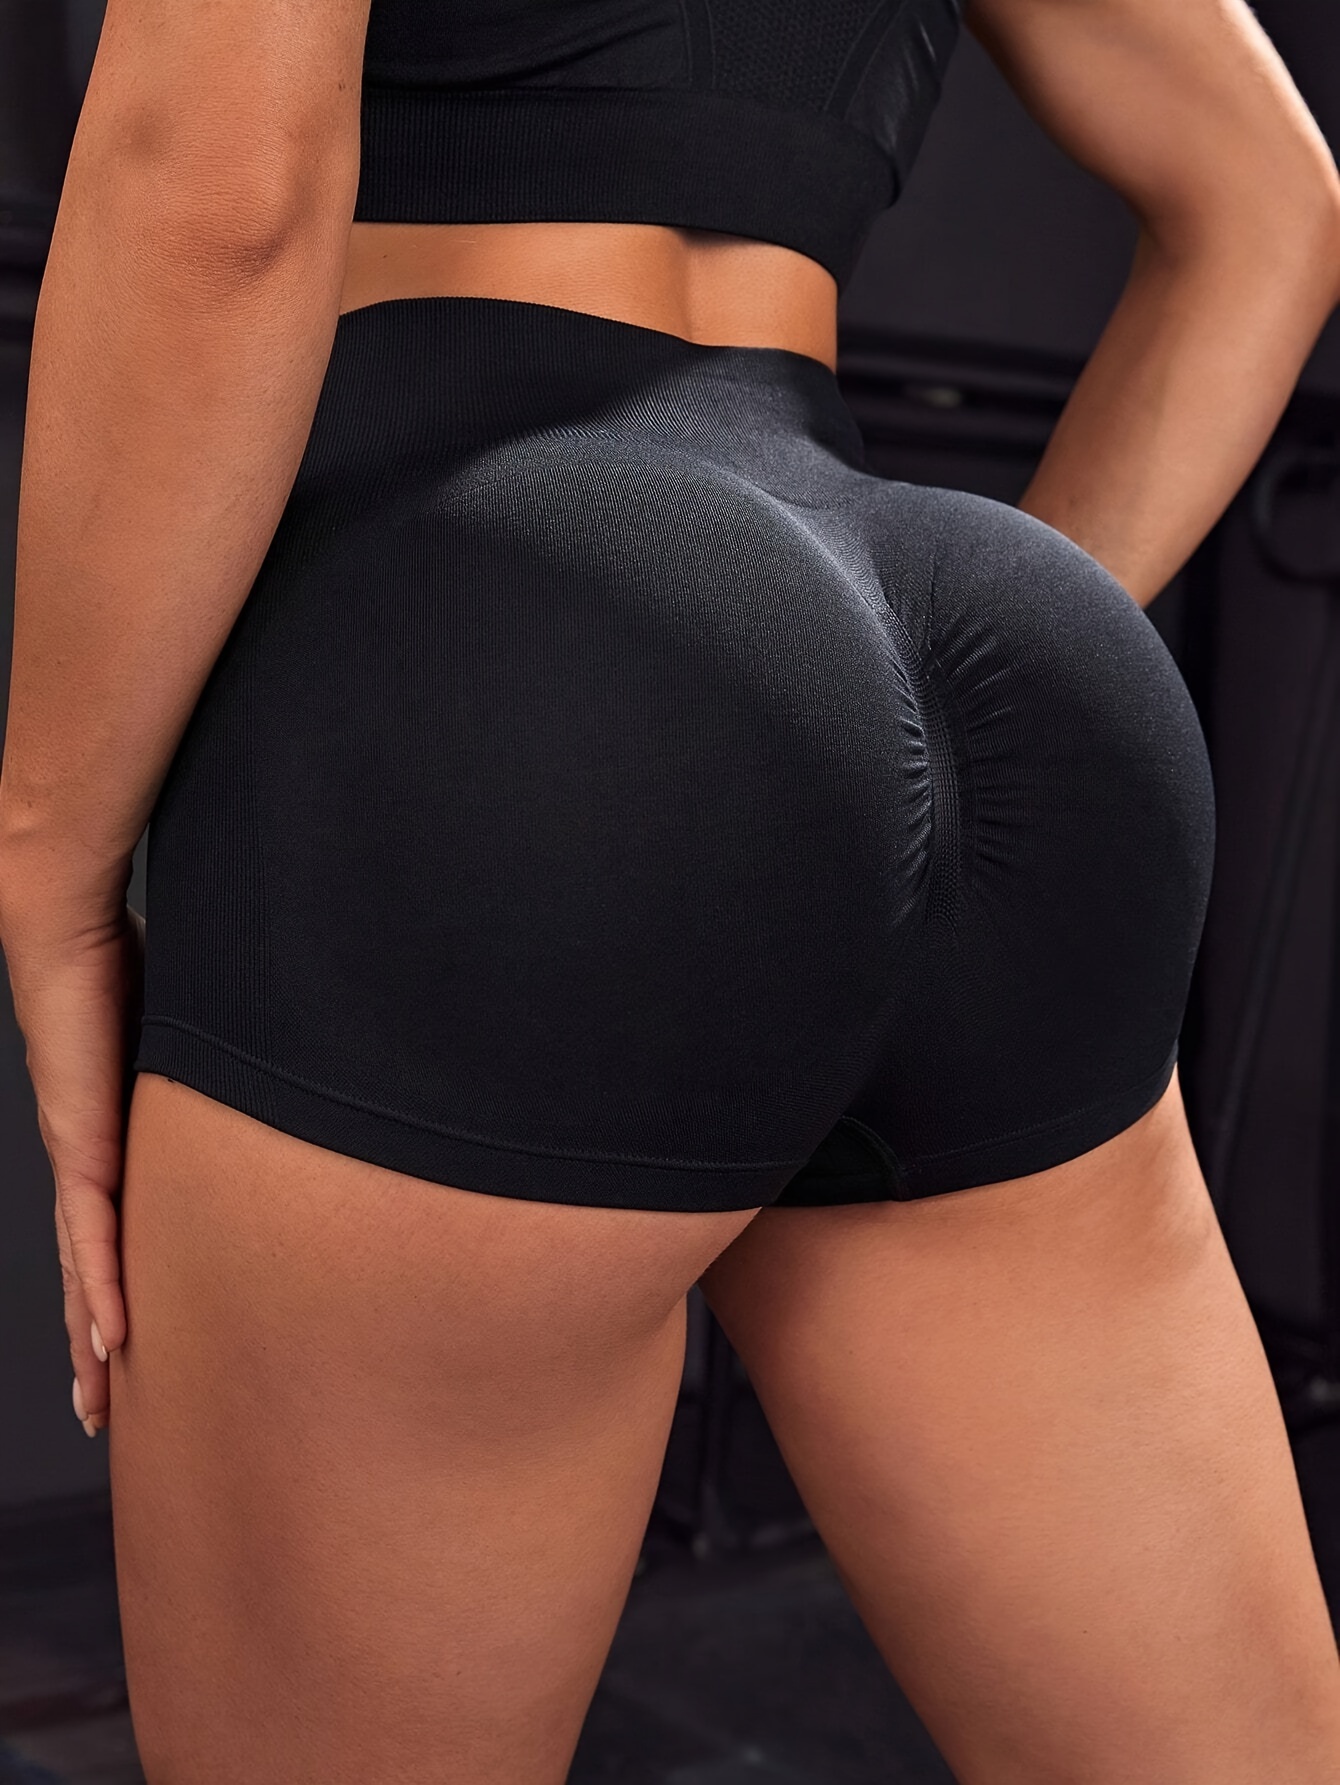 Booty Shorts for Women High Waisted Yoga Shorts Sexy Butt Lifting